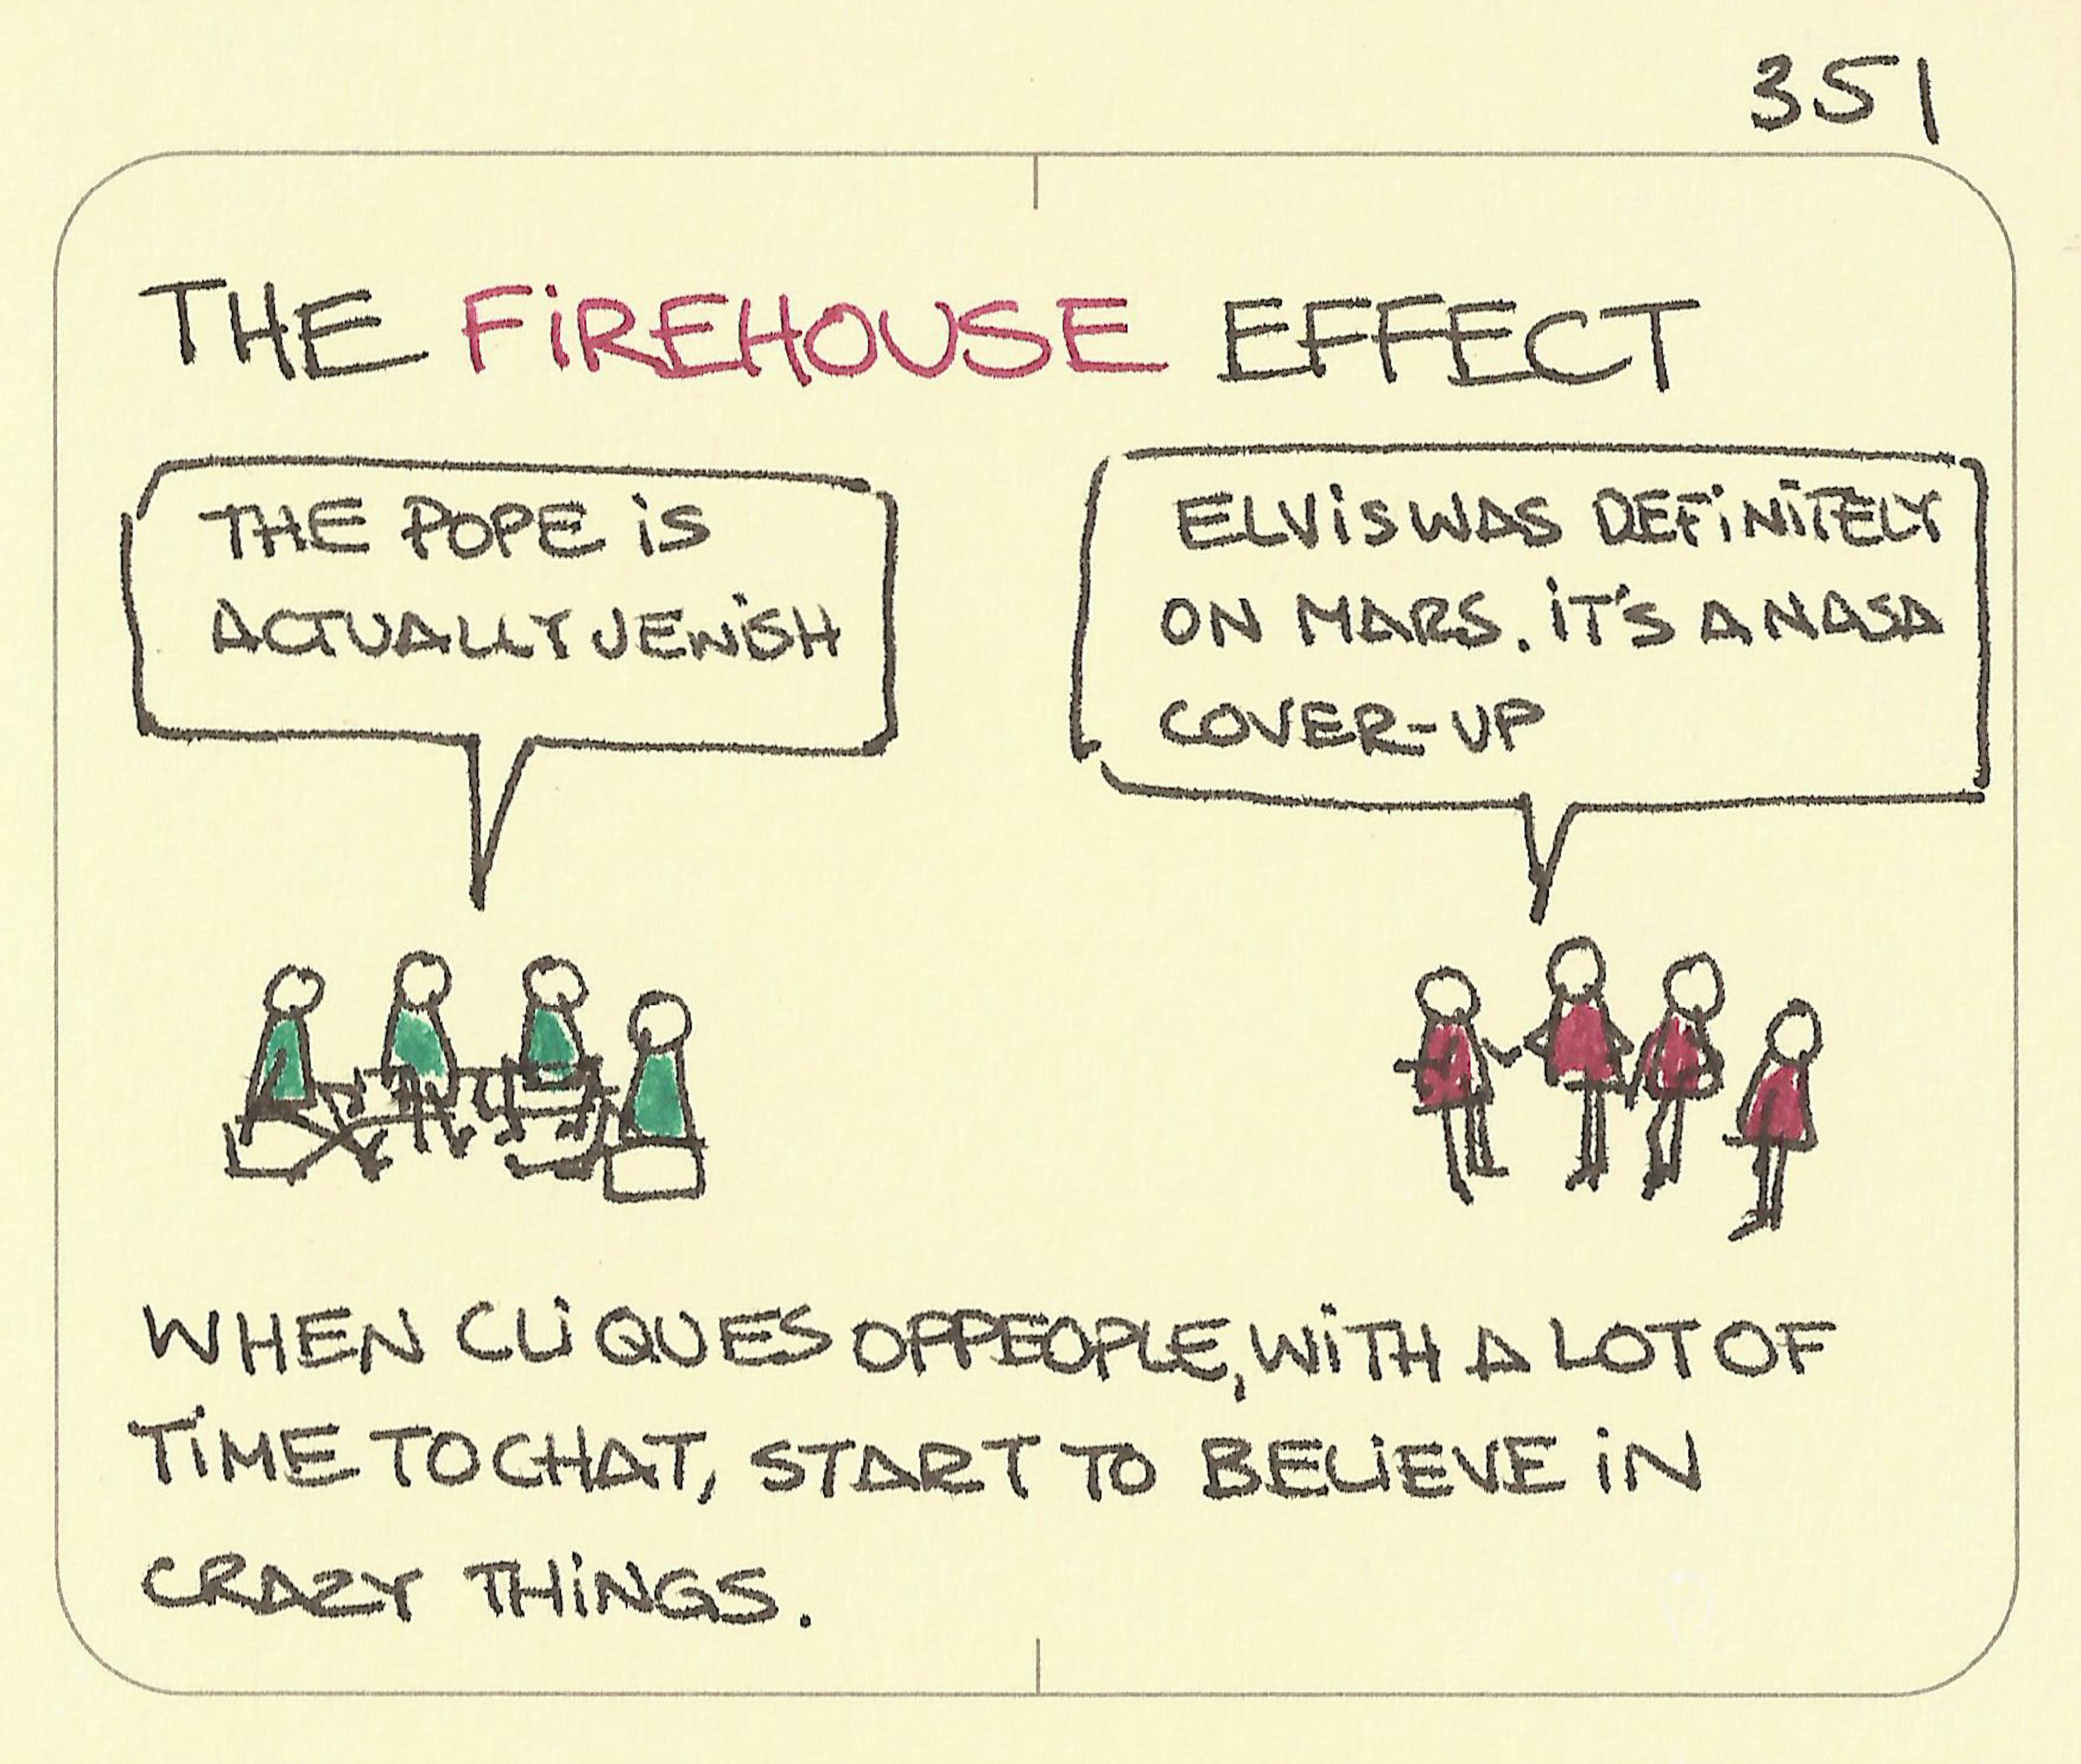 The Firehouse Effect - Sketchplanations